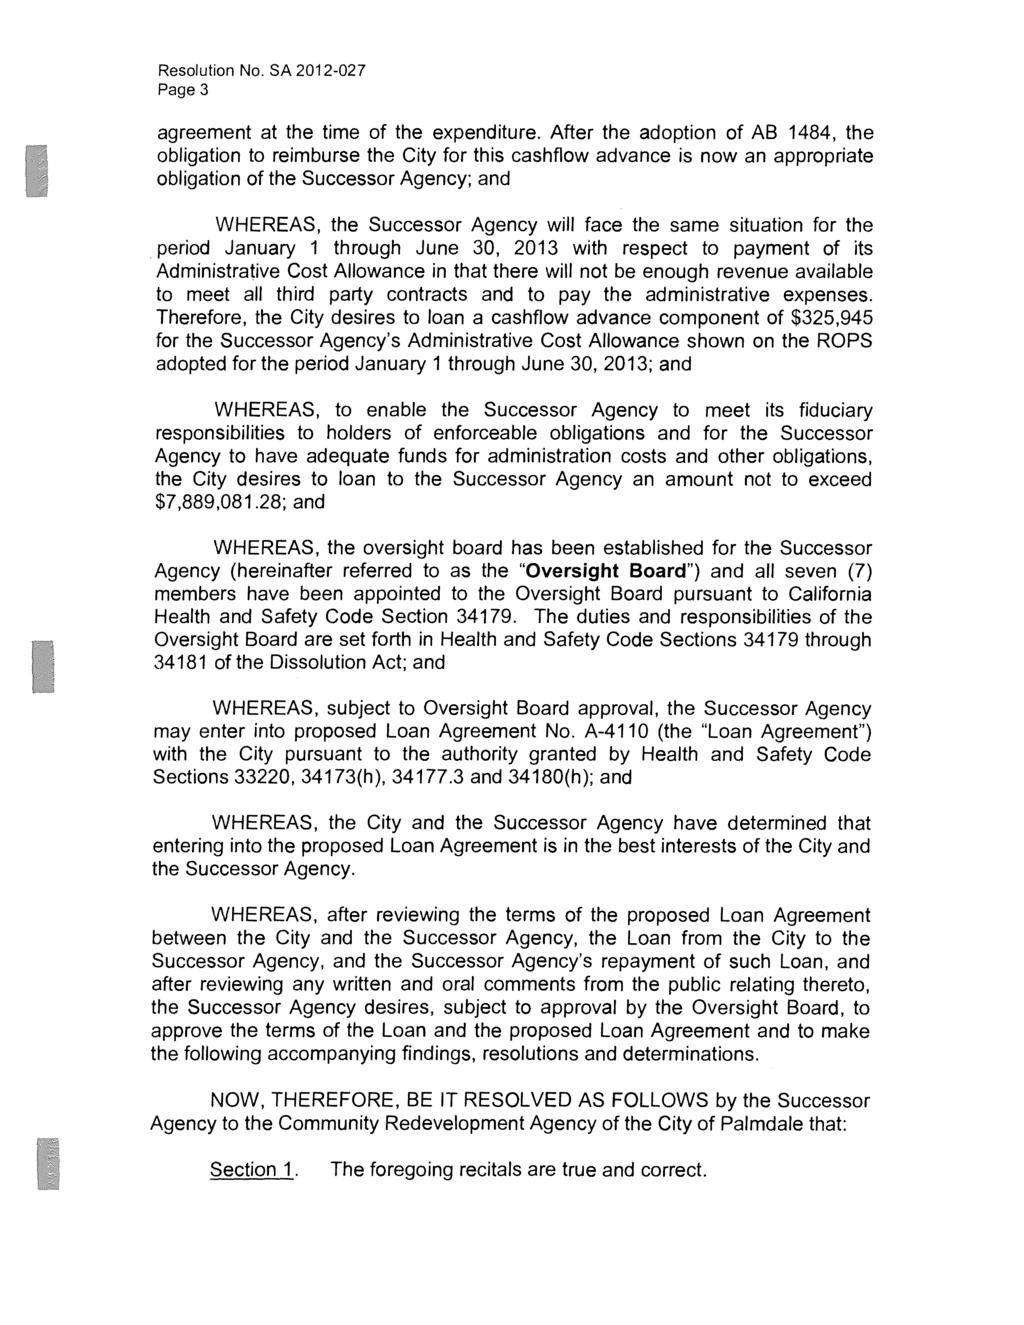 Resolution No. SA2012-027 Page 3 agreement at the time of the expenditure.